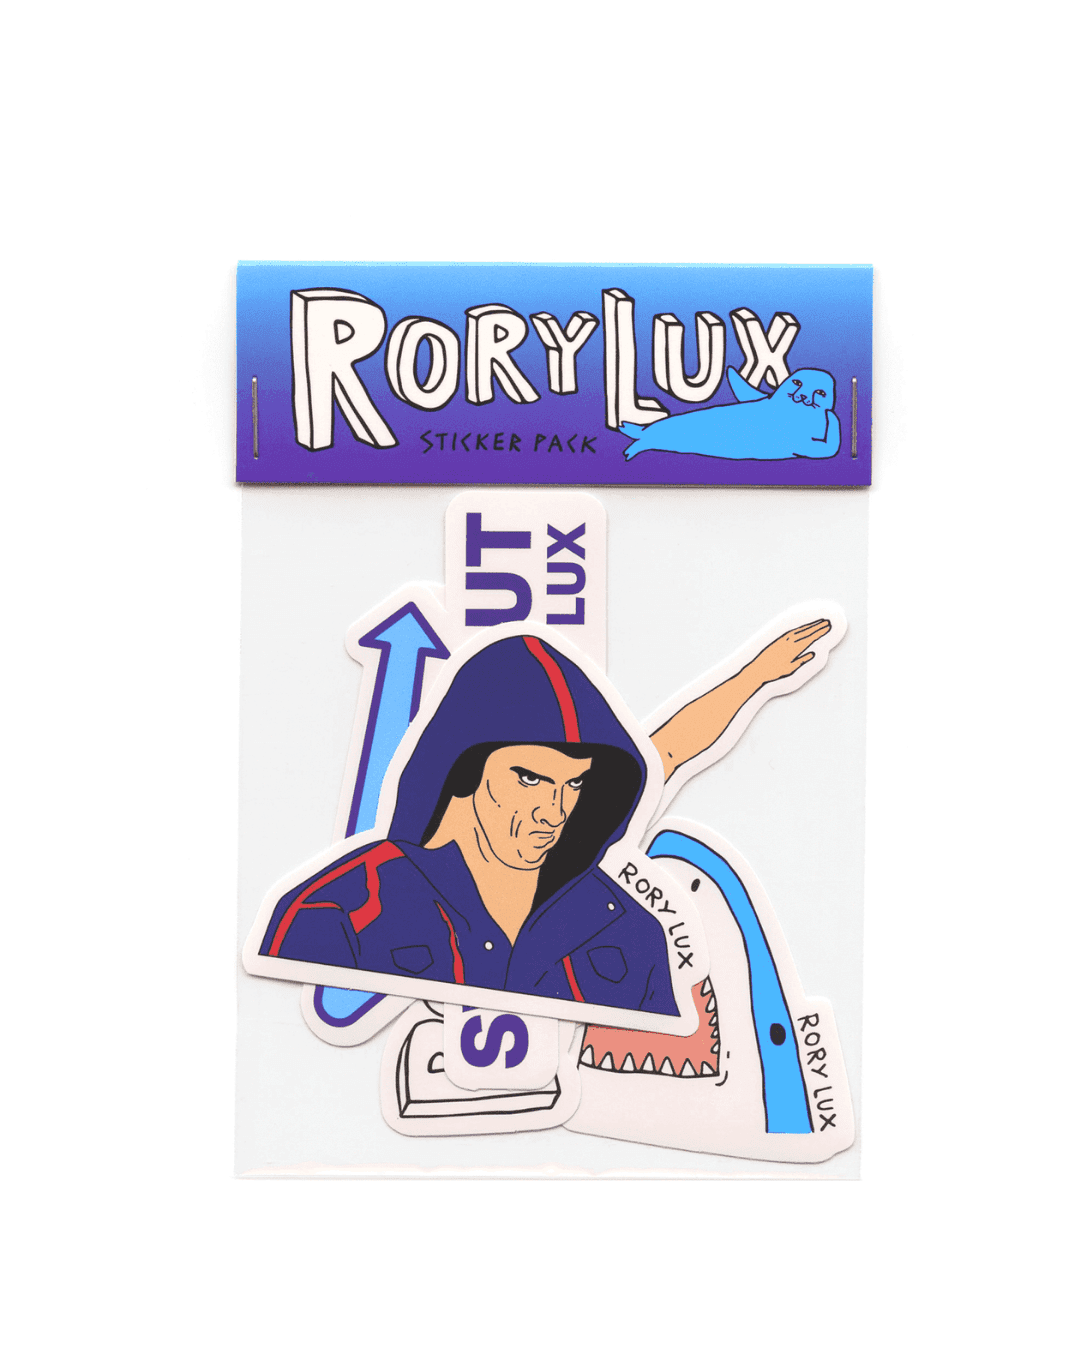 Rory Lux Swim Sticker Pack - DEEP-END